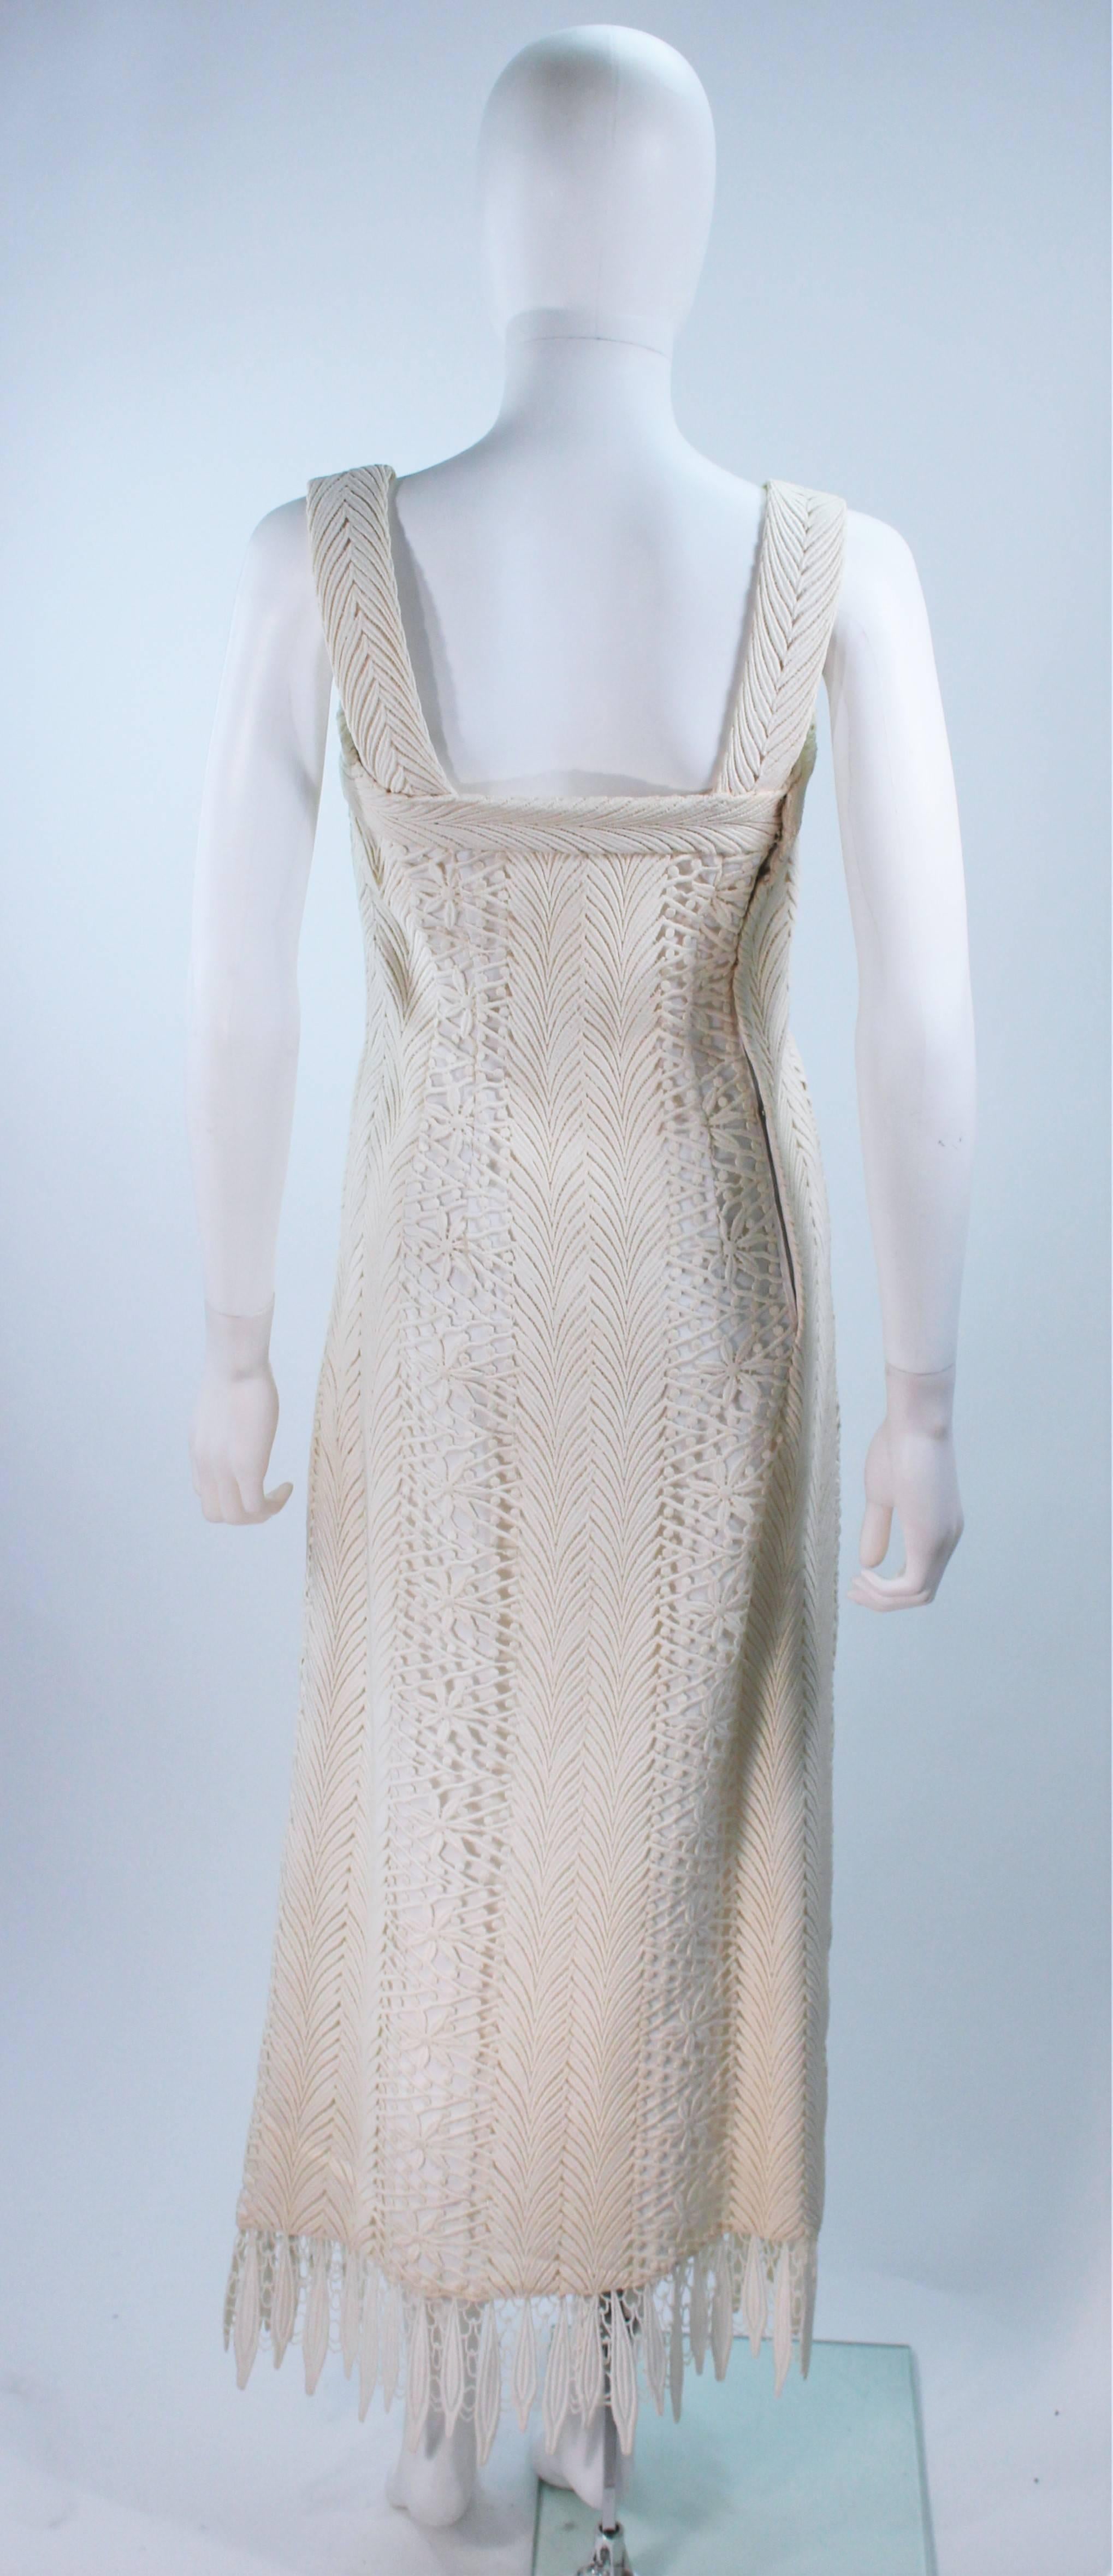 Vintage Off White Lace Applique Dress with Scalloped Edges Size 4 For Sale 3